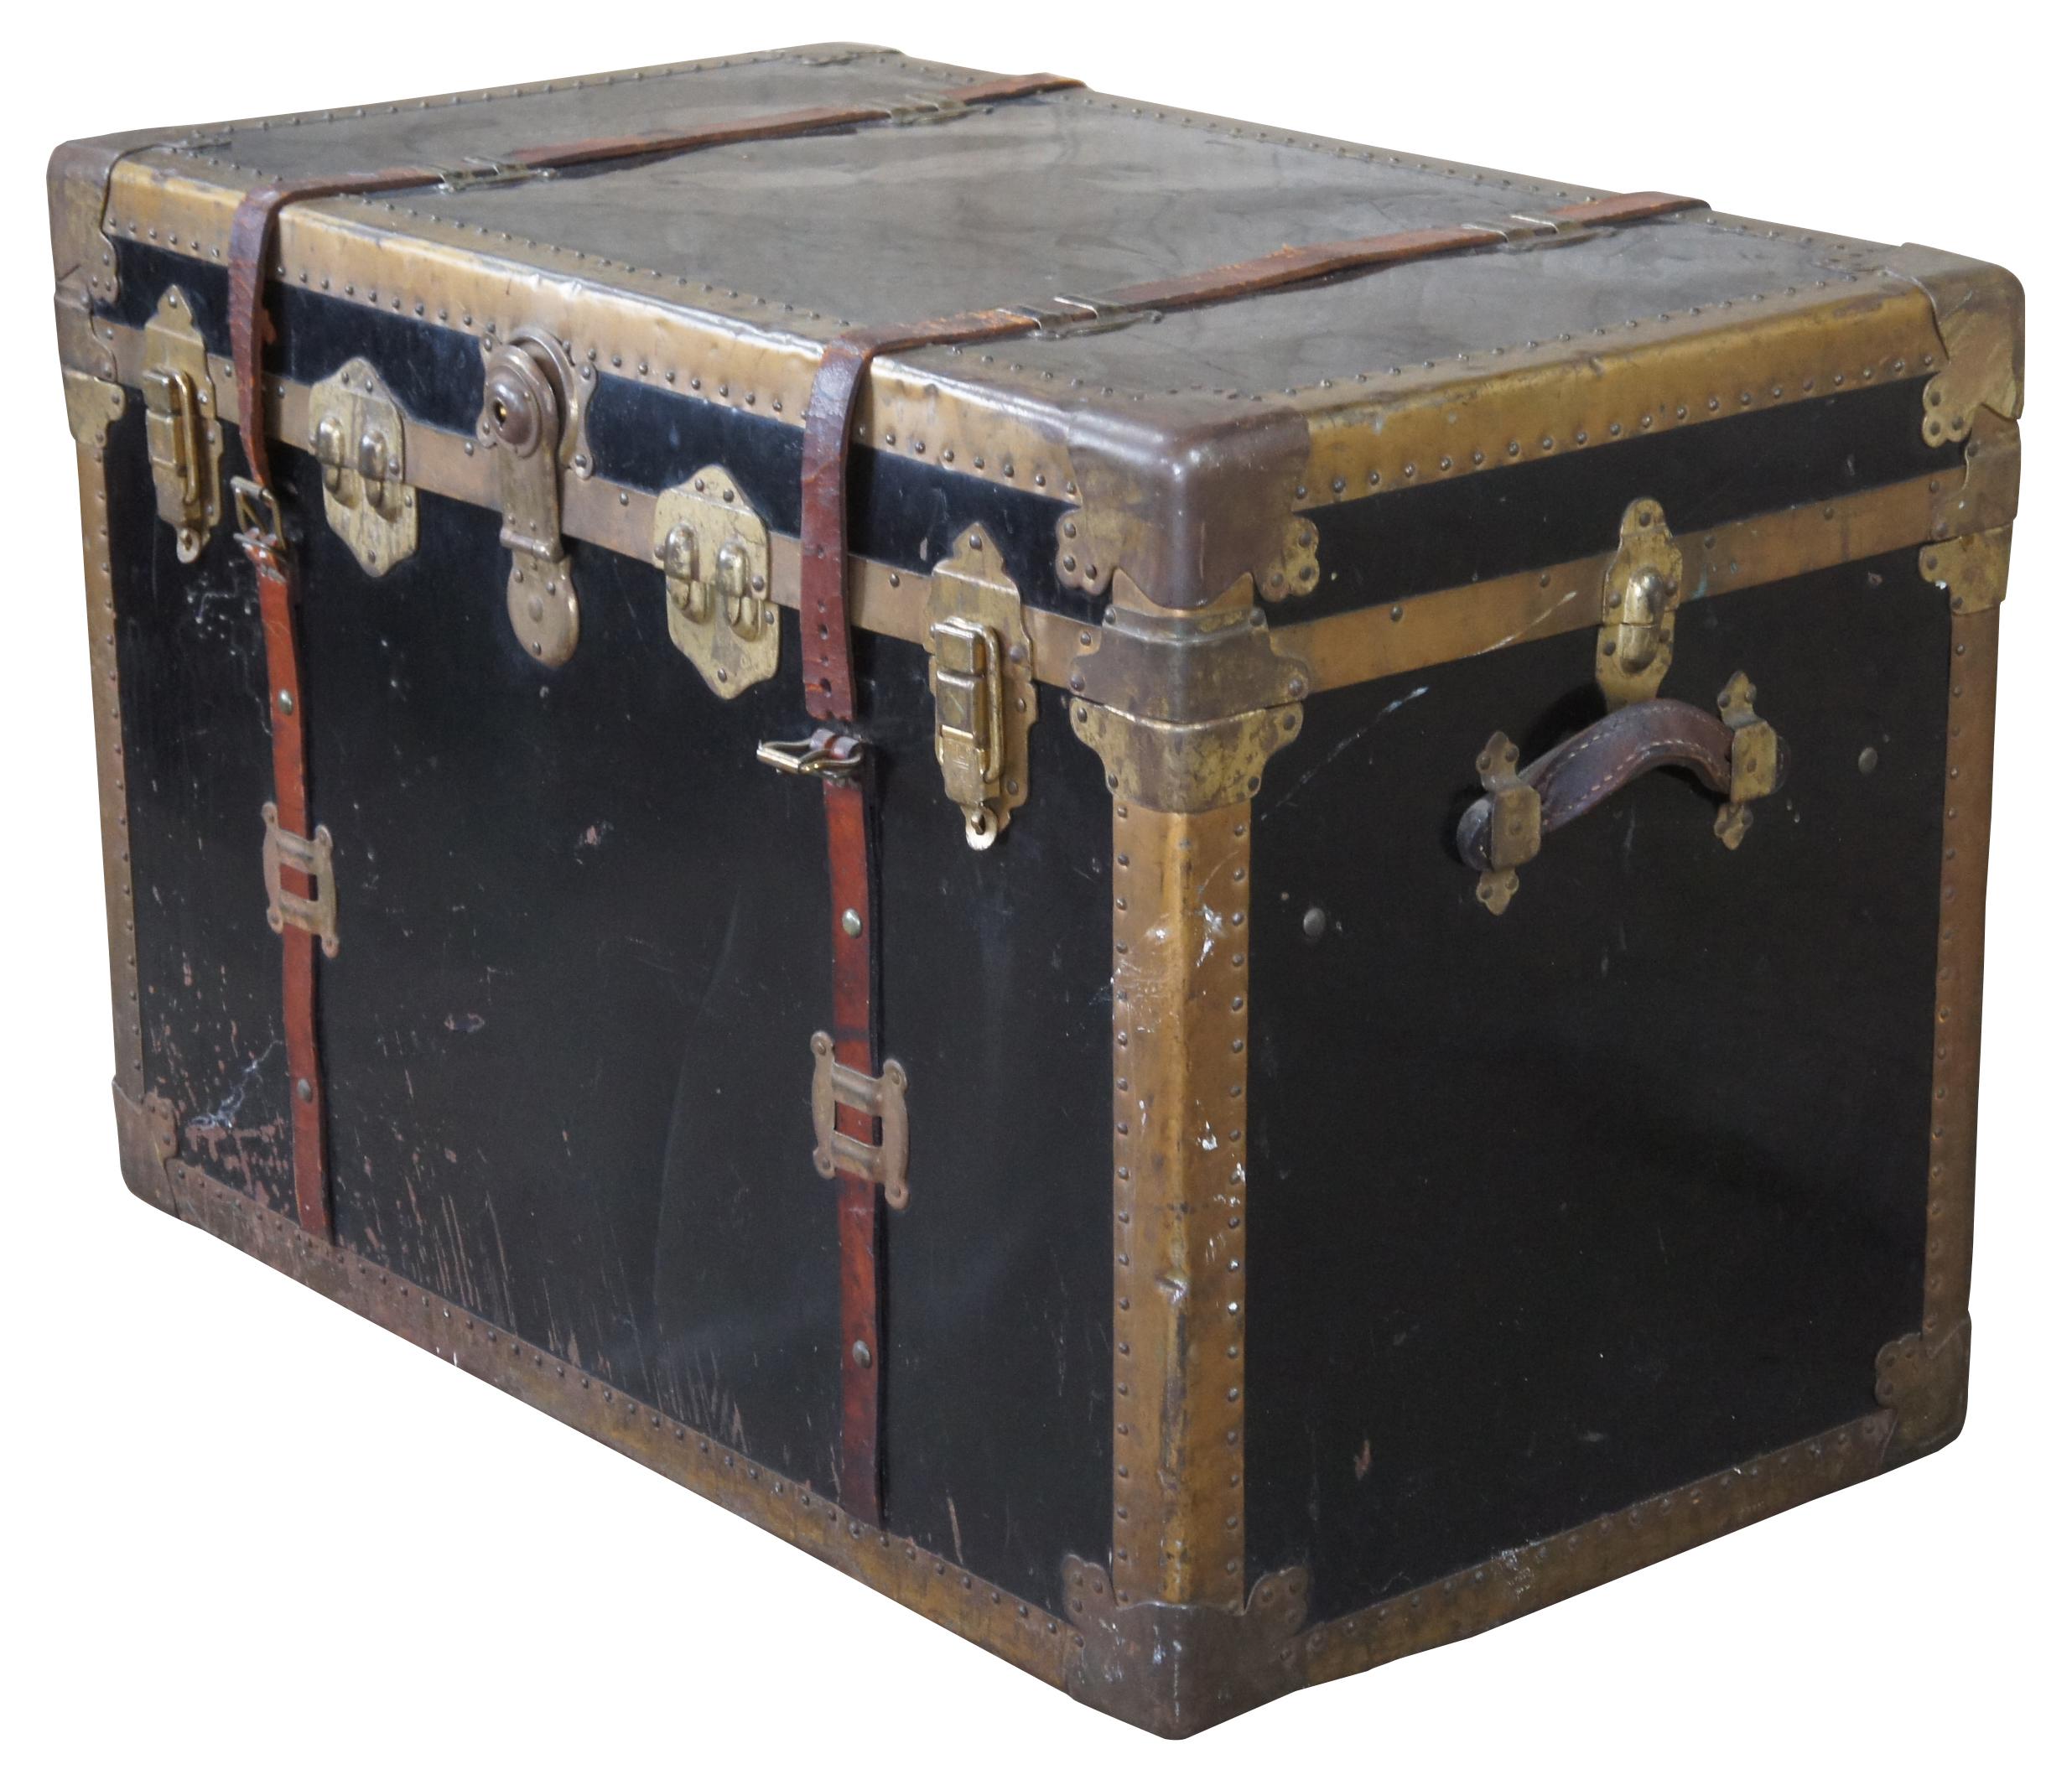 Antique Victorian steamer trunk or chest. Made of metal and brass with nailhead trim and leather straps and handles. Features interior compartment for organizing clothing / accessories.
 